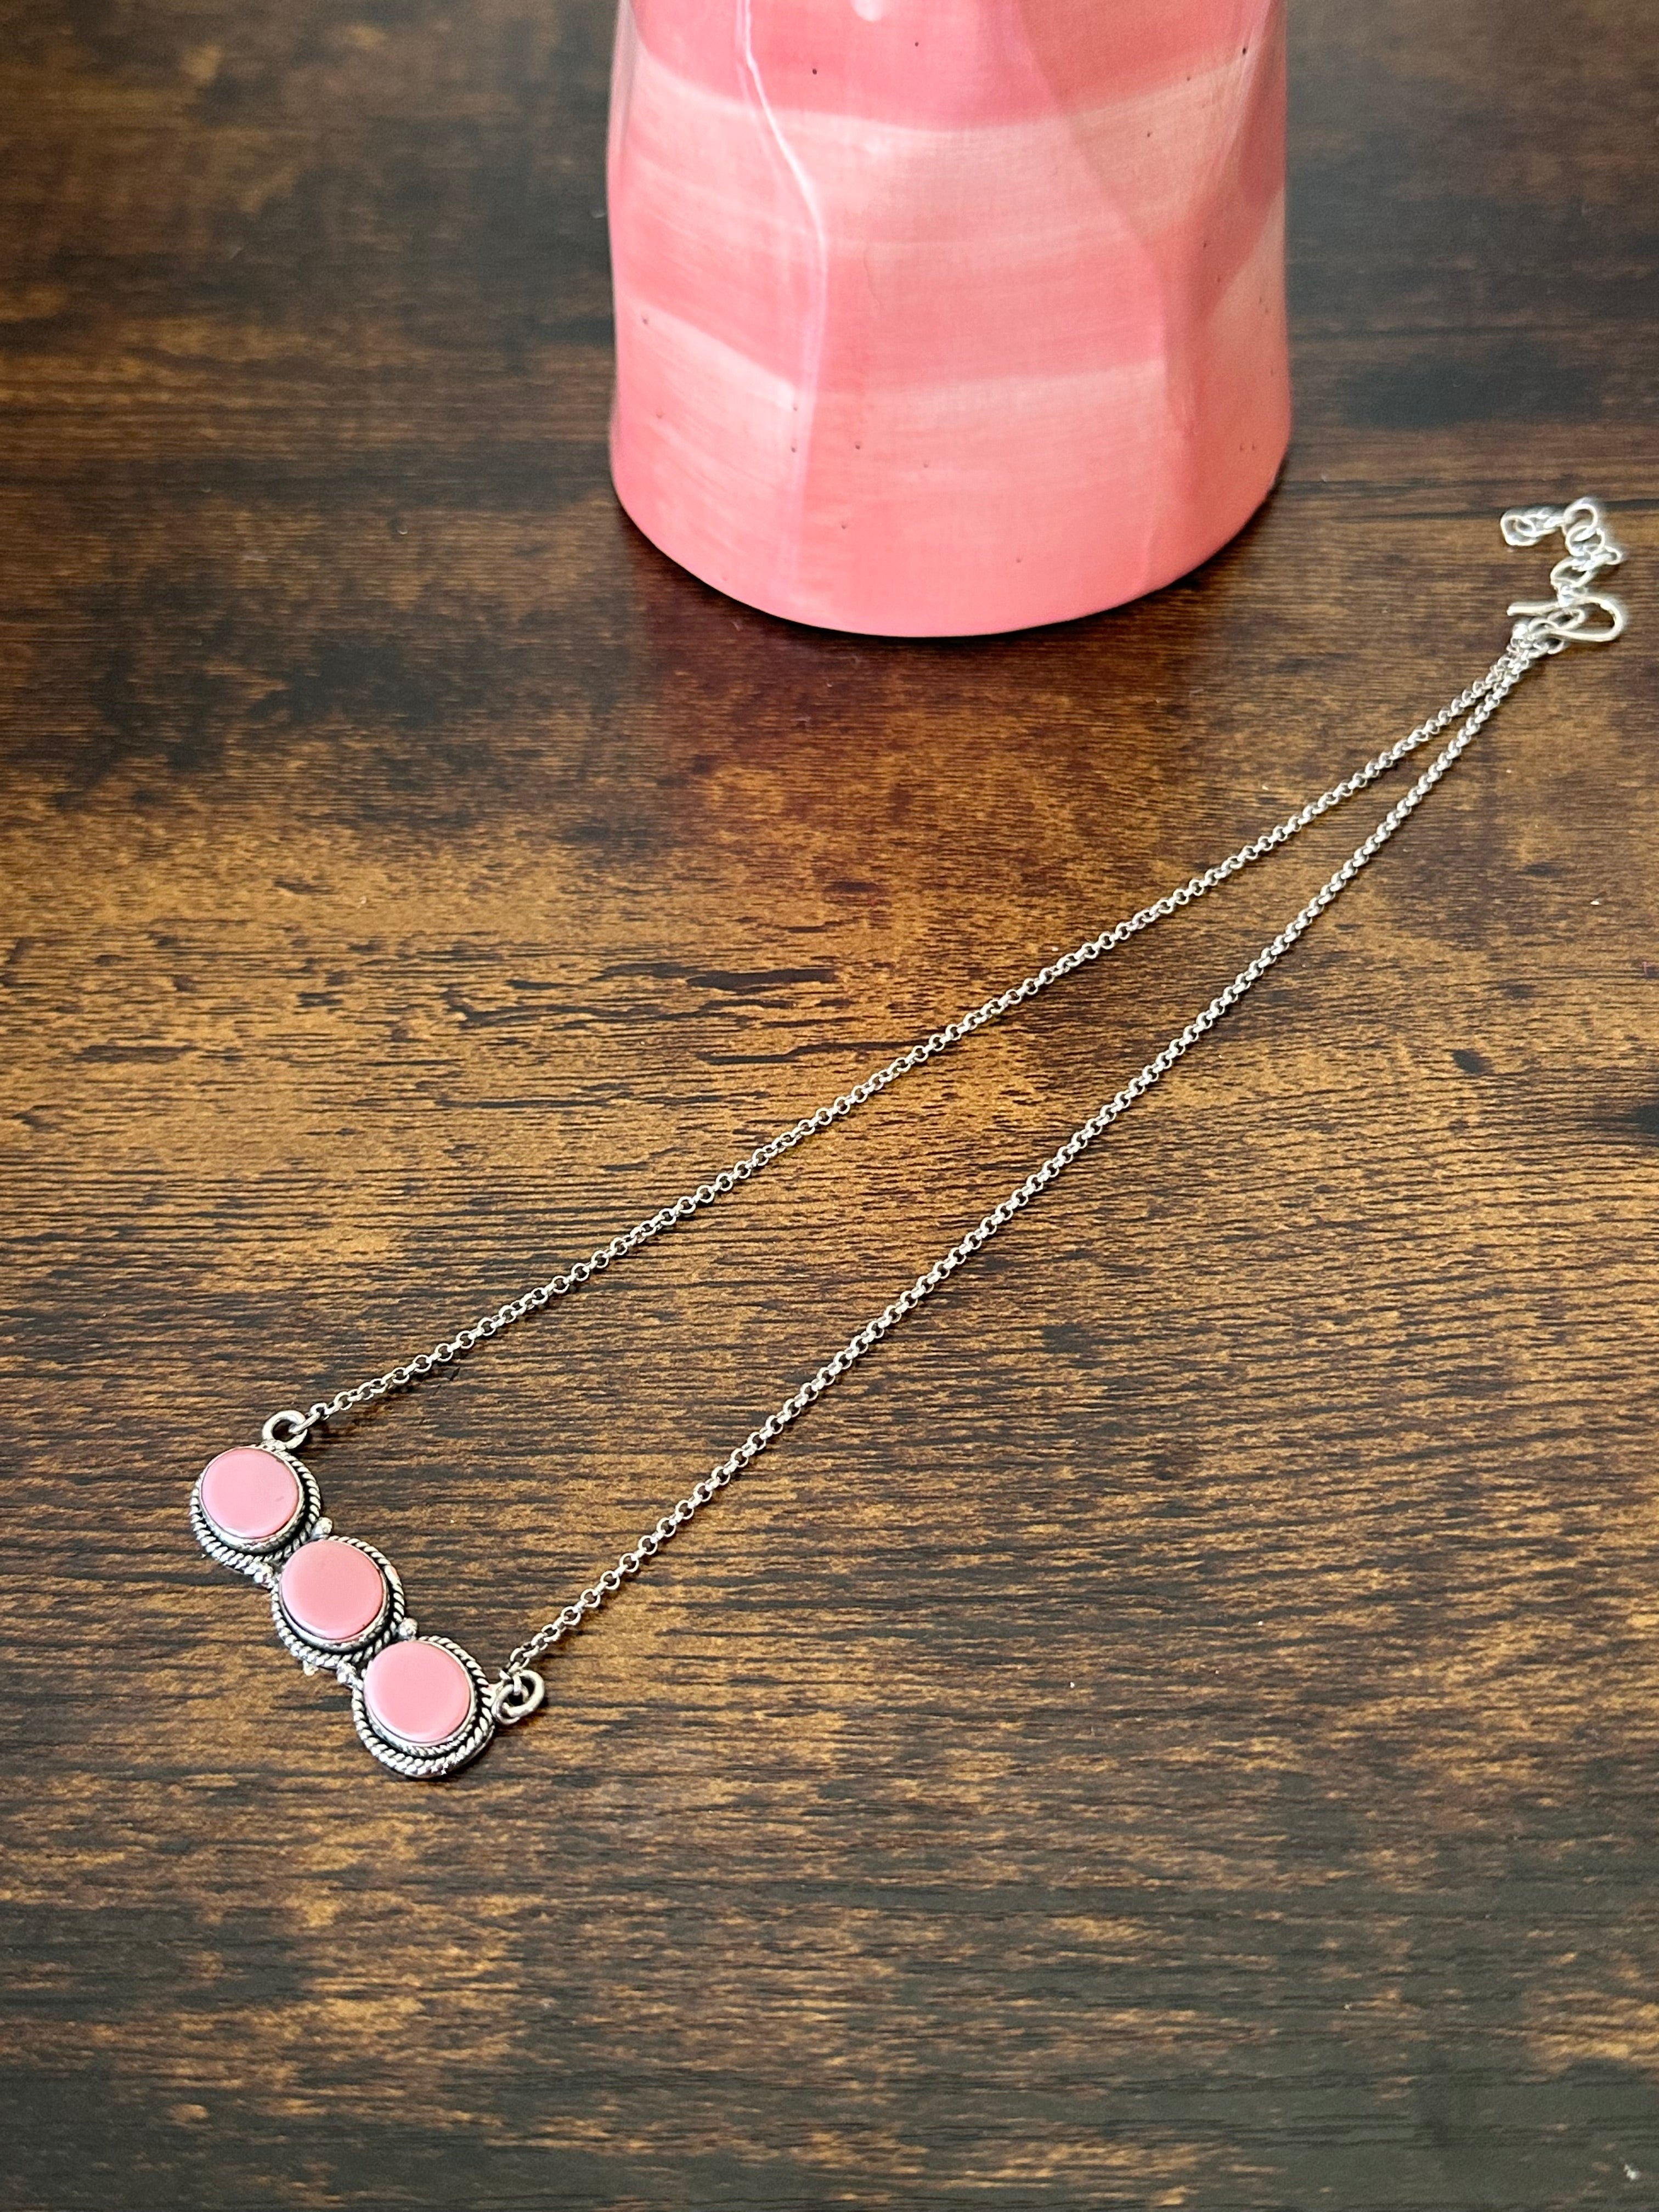 Southwest Handmade Pink Conch & Sterling Silver Bar Necklace